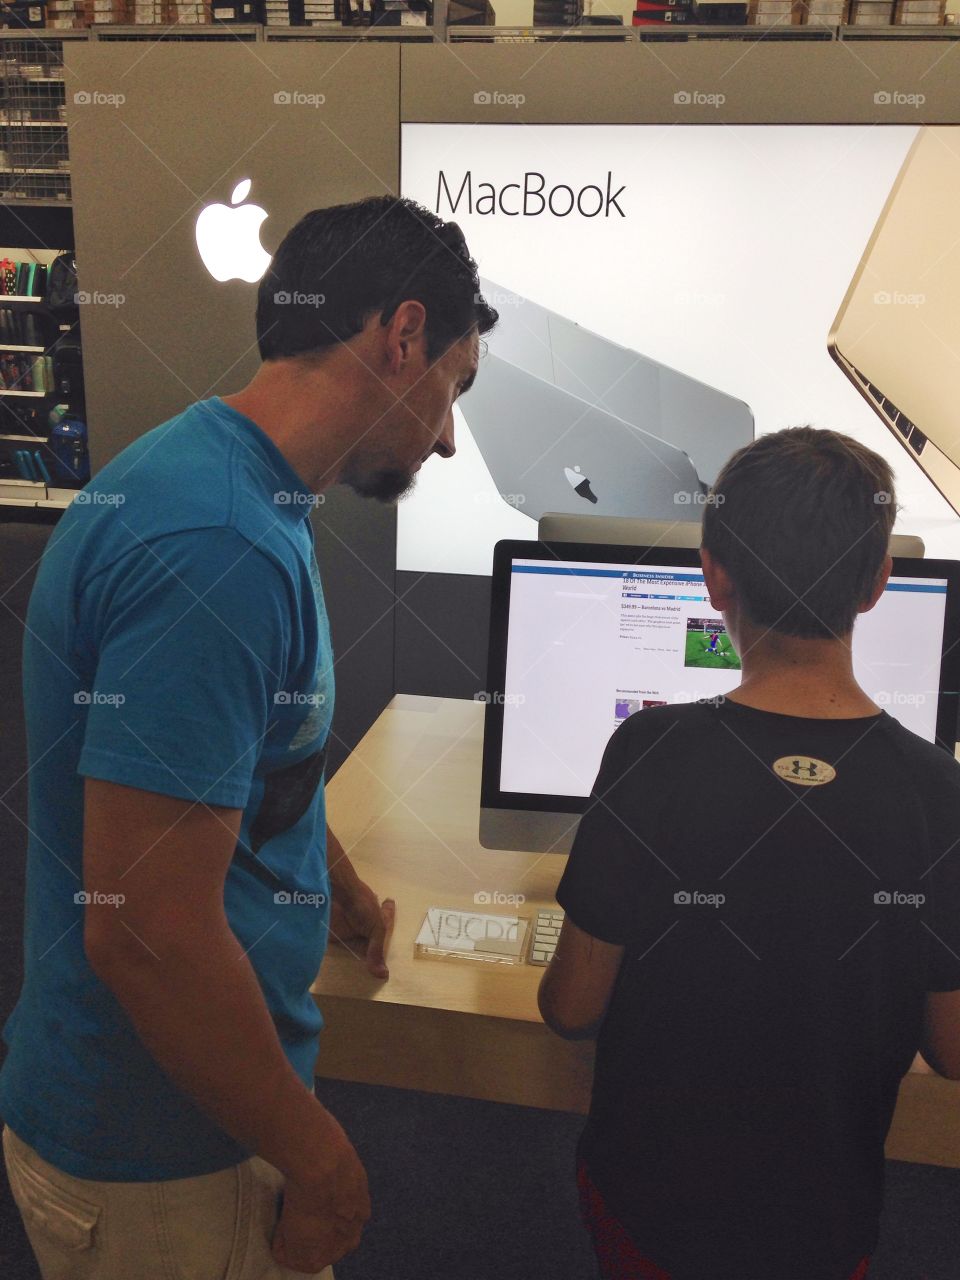 To Apple or not to Apple . Man and boy trying out a large screen Mac book